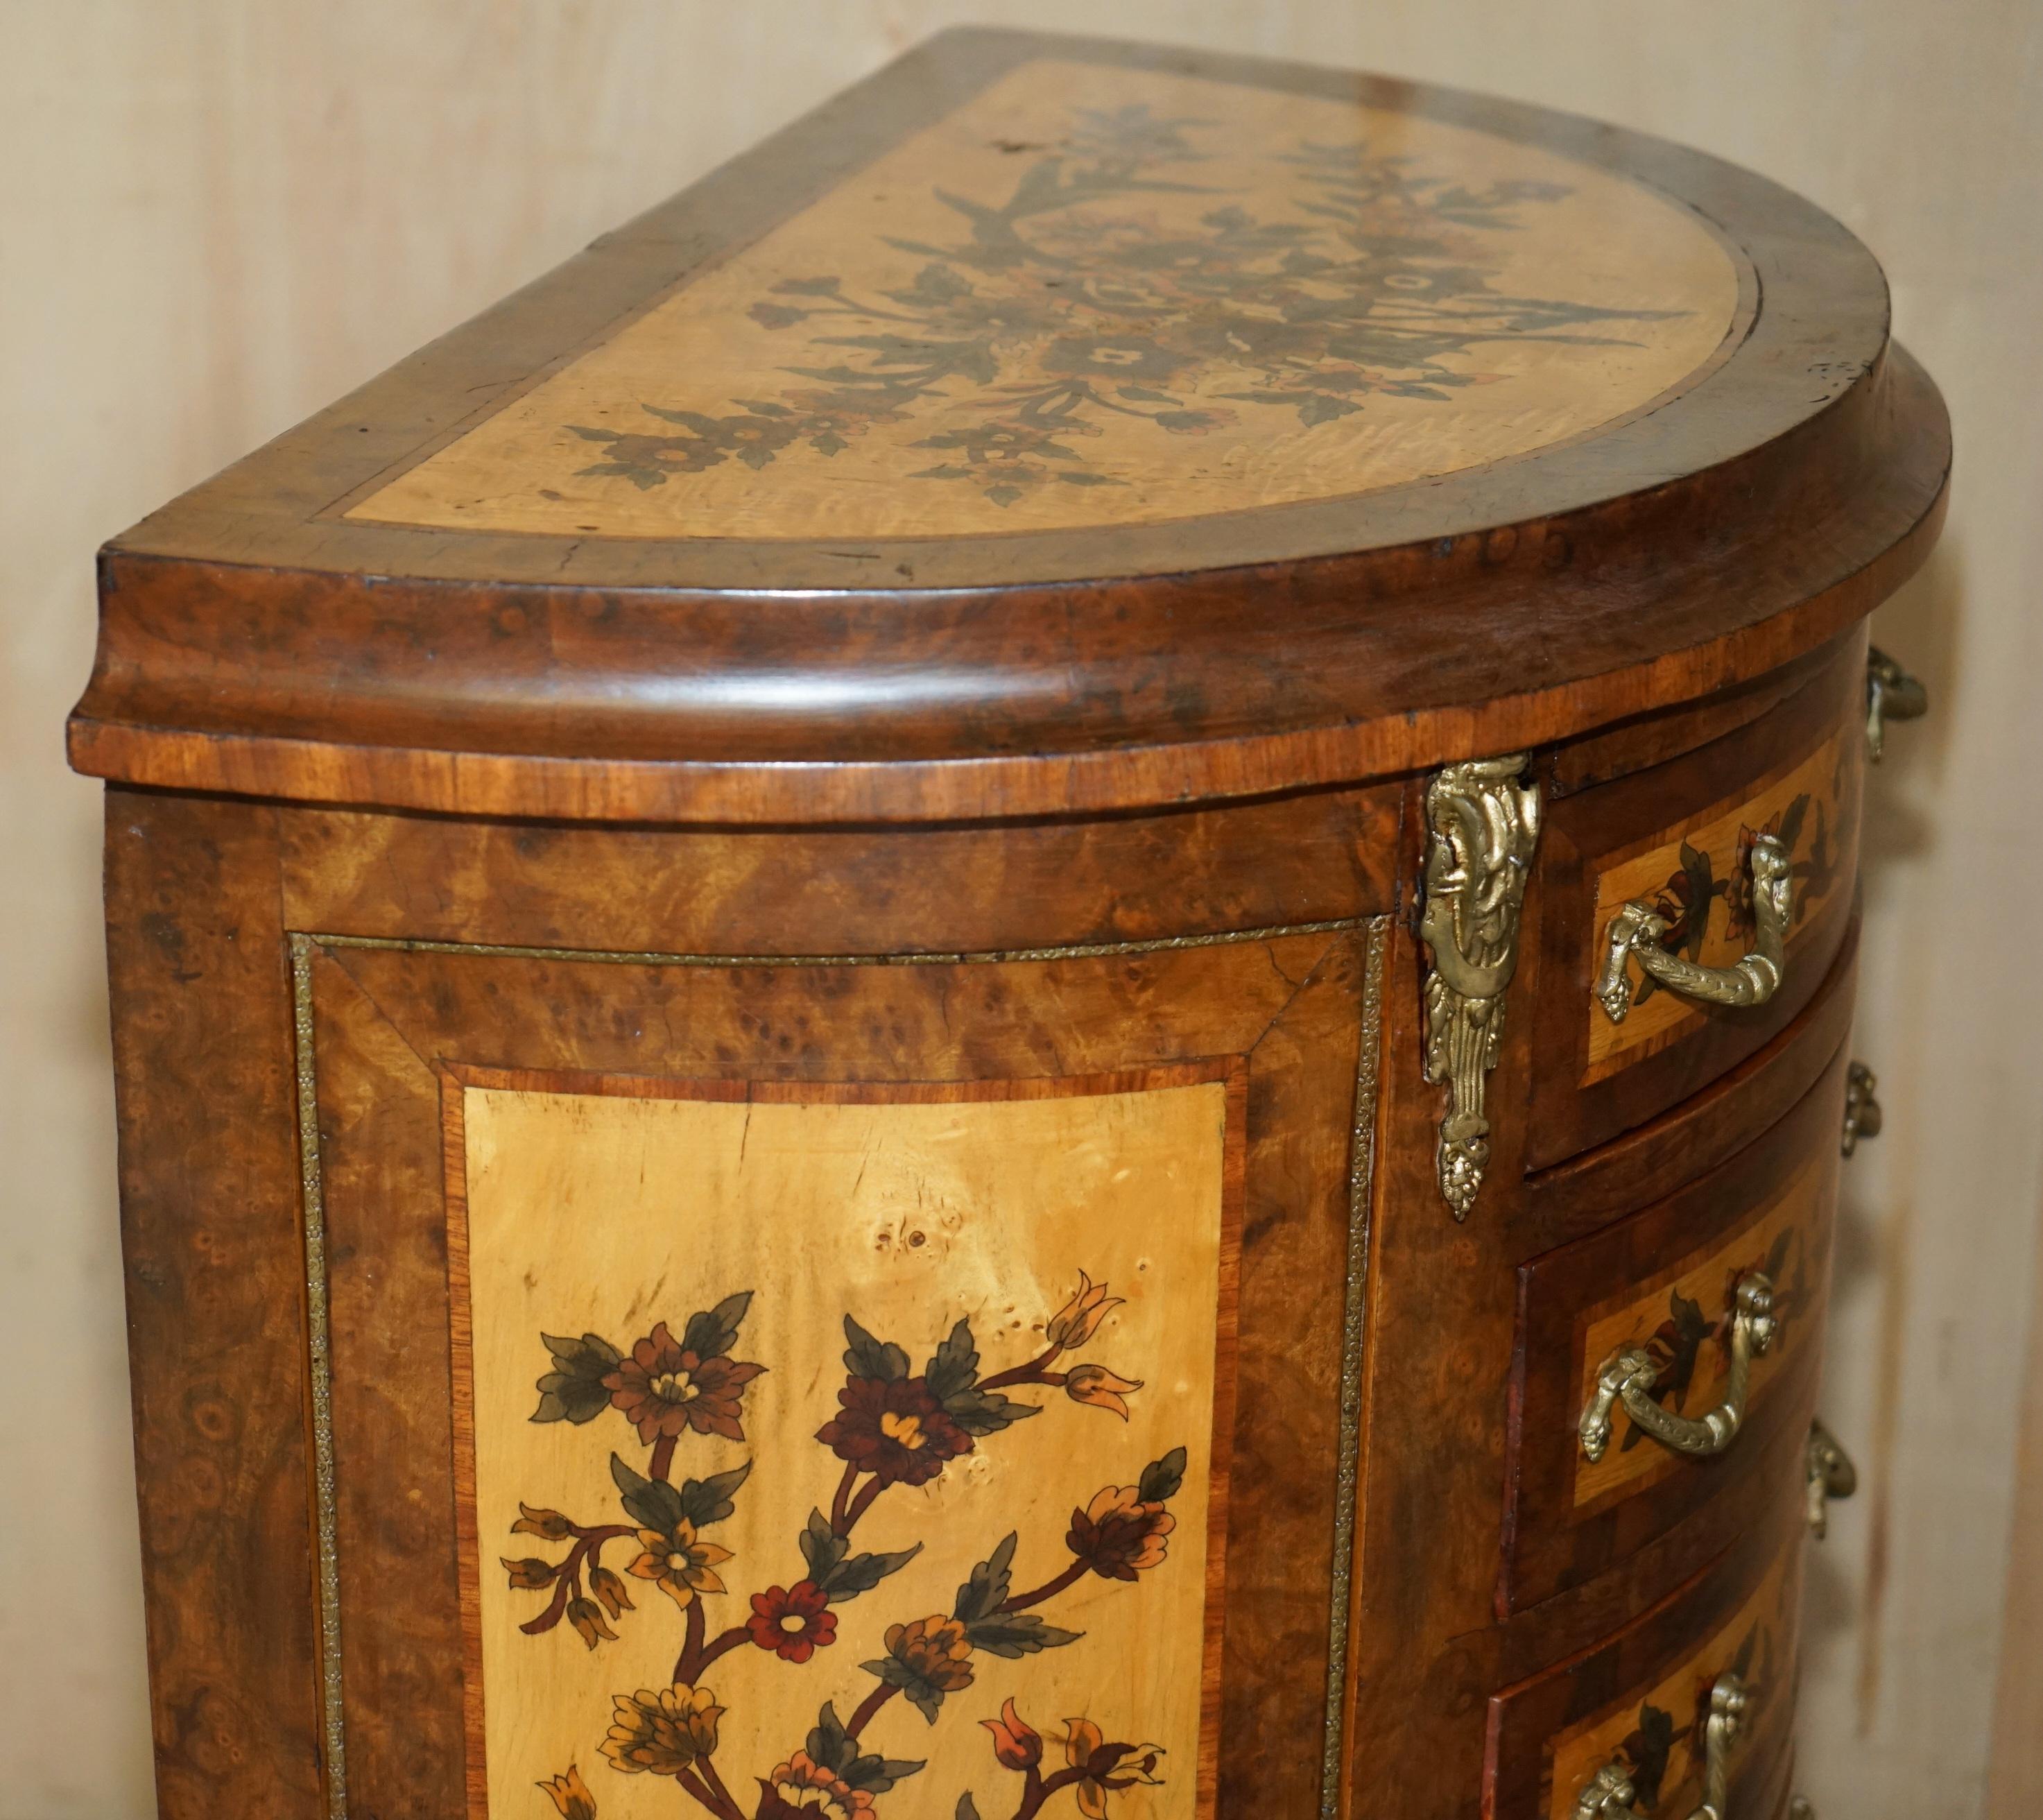 LOVELY FRENCH ViNTAGE PAINTED CIRCA 1940'S BURR WALNUT BRASS DEMI LUNE DRAWERS For Sale 12